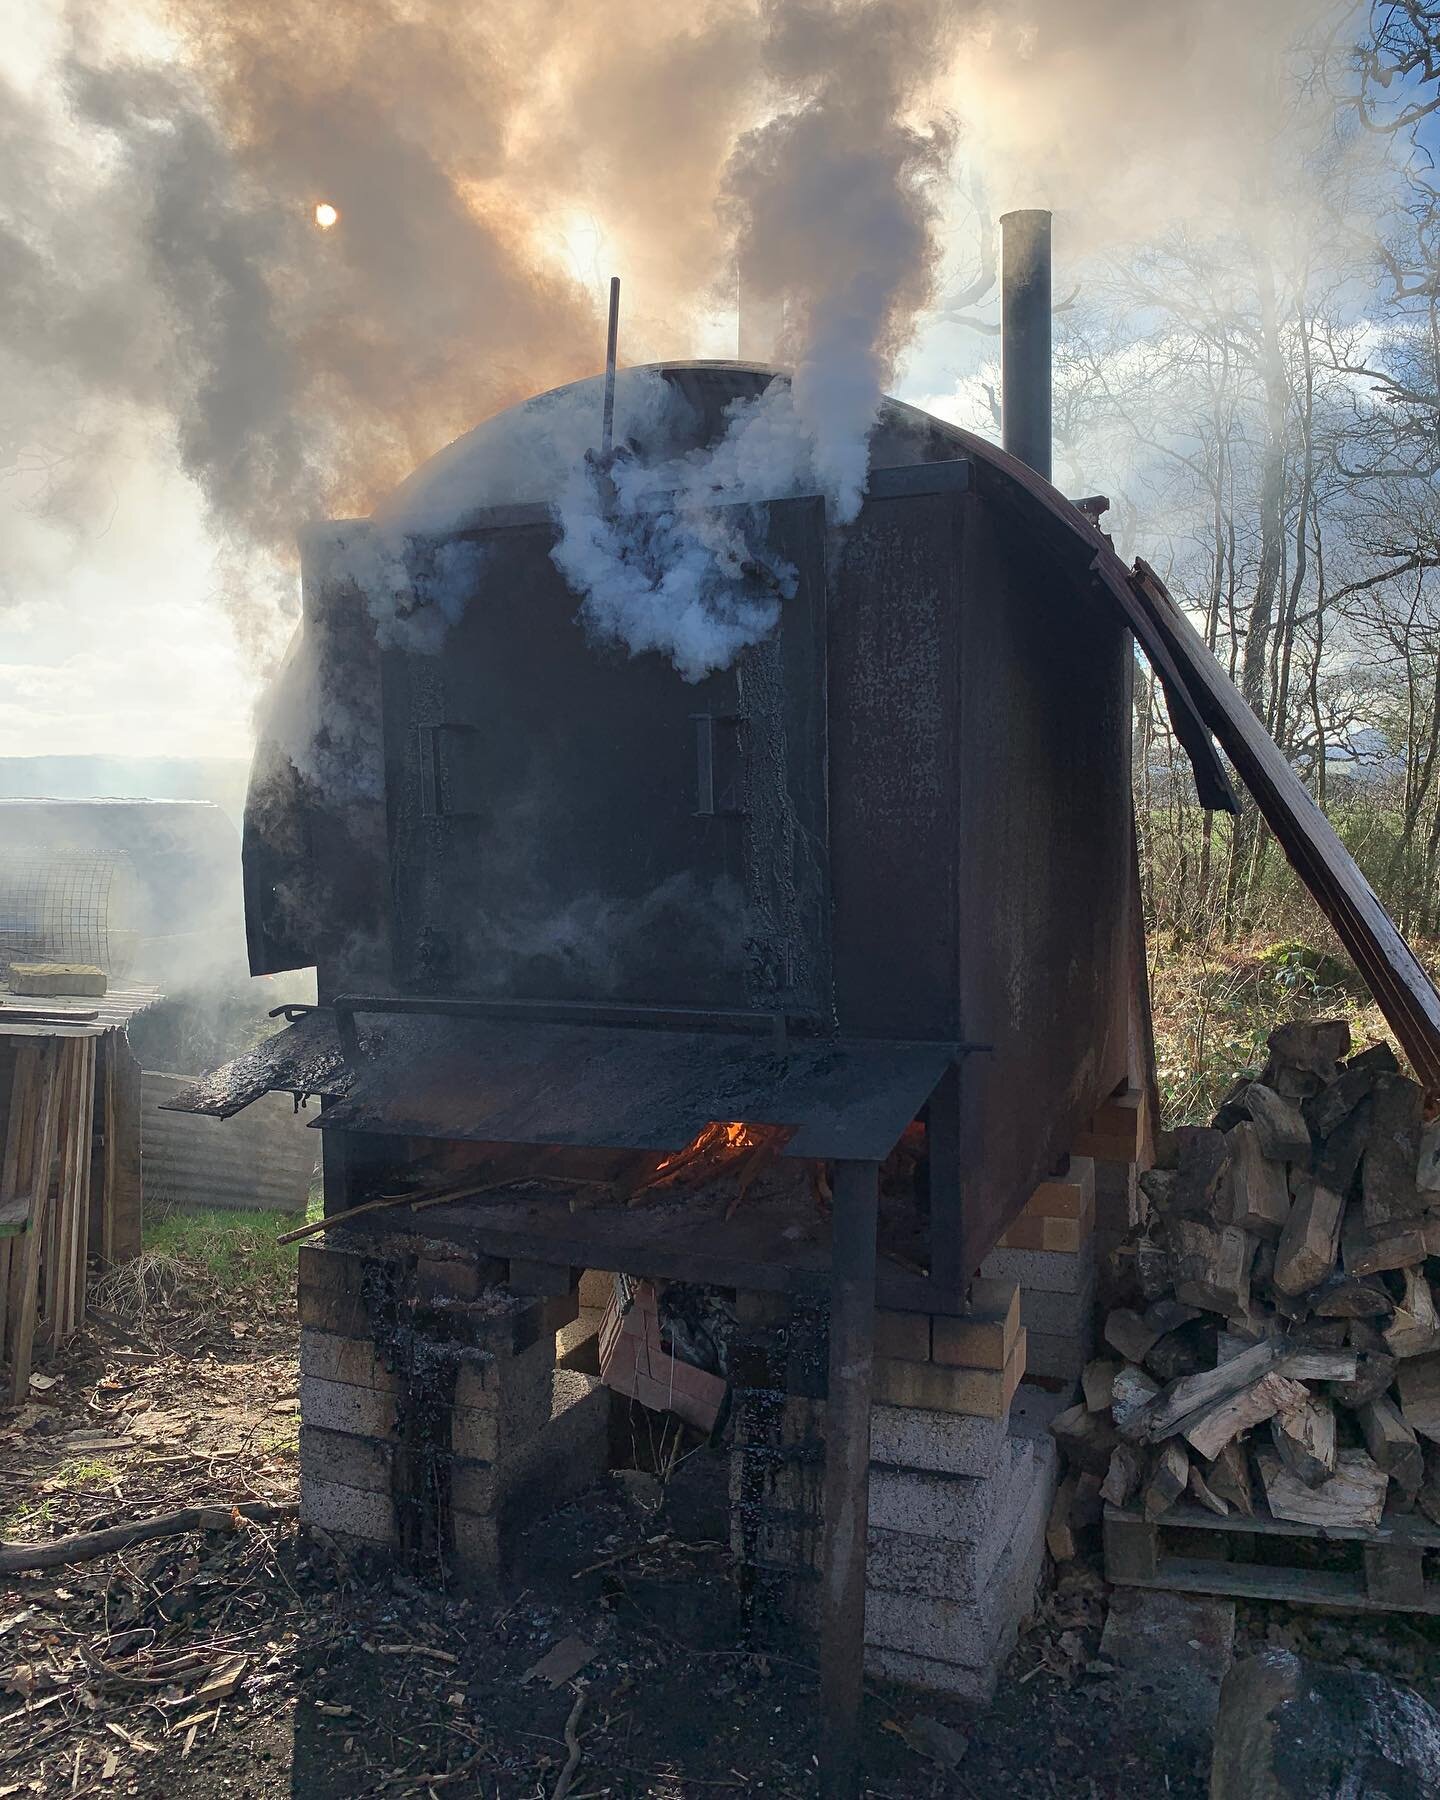 Many thanks to the lovely folk @scottishcharcoal for introducing me to Betty, their charcoal kiln. I spent a happy day listening to her hiss and sing whilst chatting to Jo and Paul about the wonders of charcoal. The sun shone, the disco ball glimmere